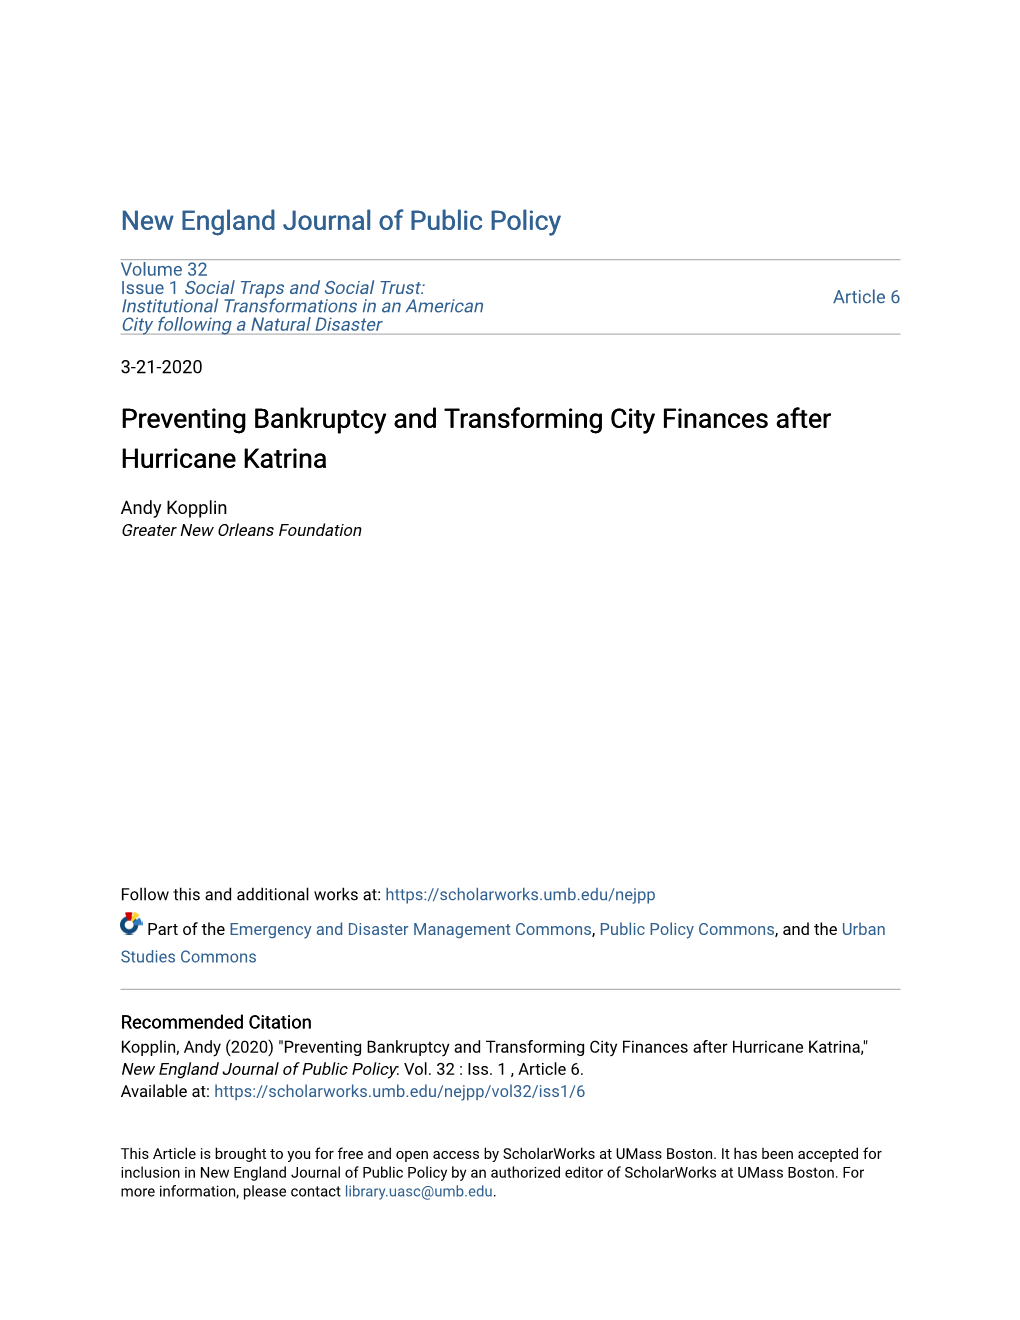 Preventing Bankruptcy and Transforming City Finances After Hurricane Katrina